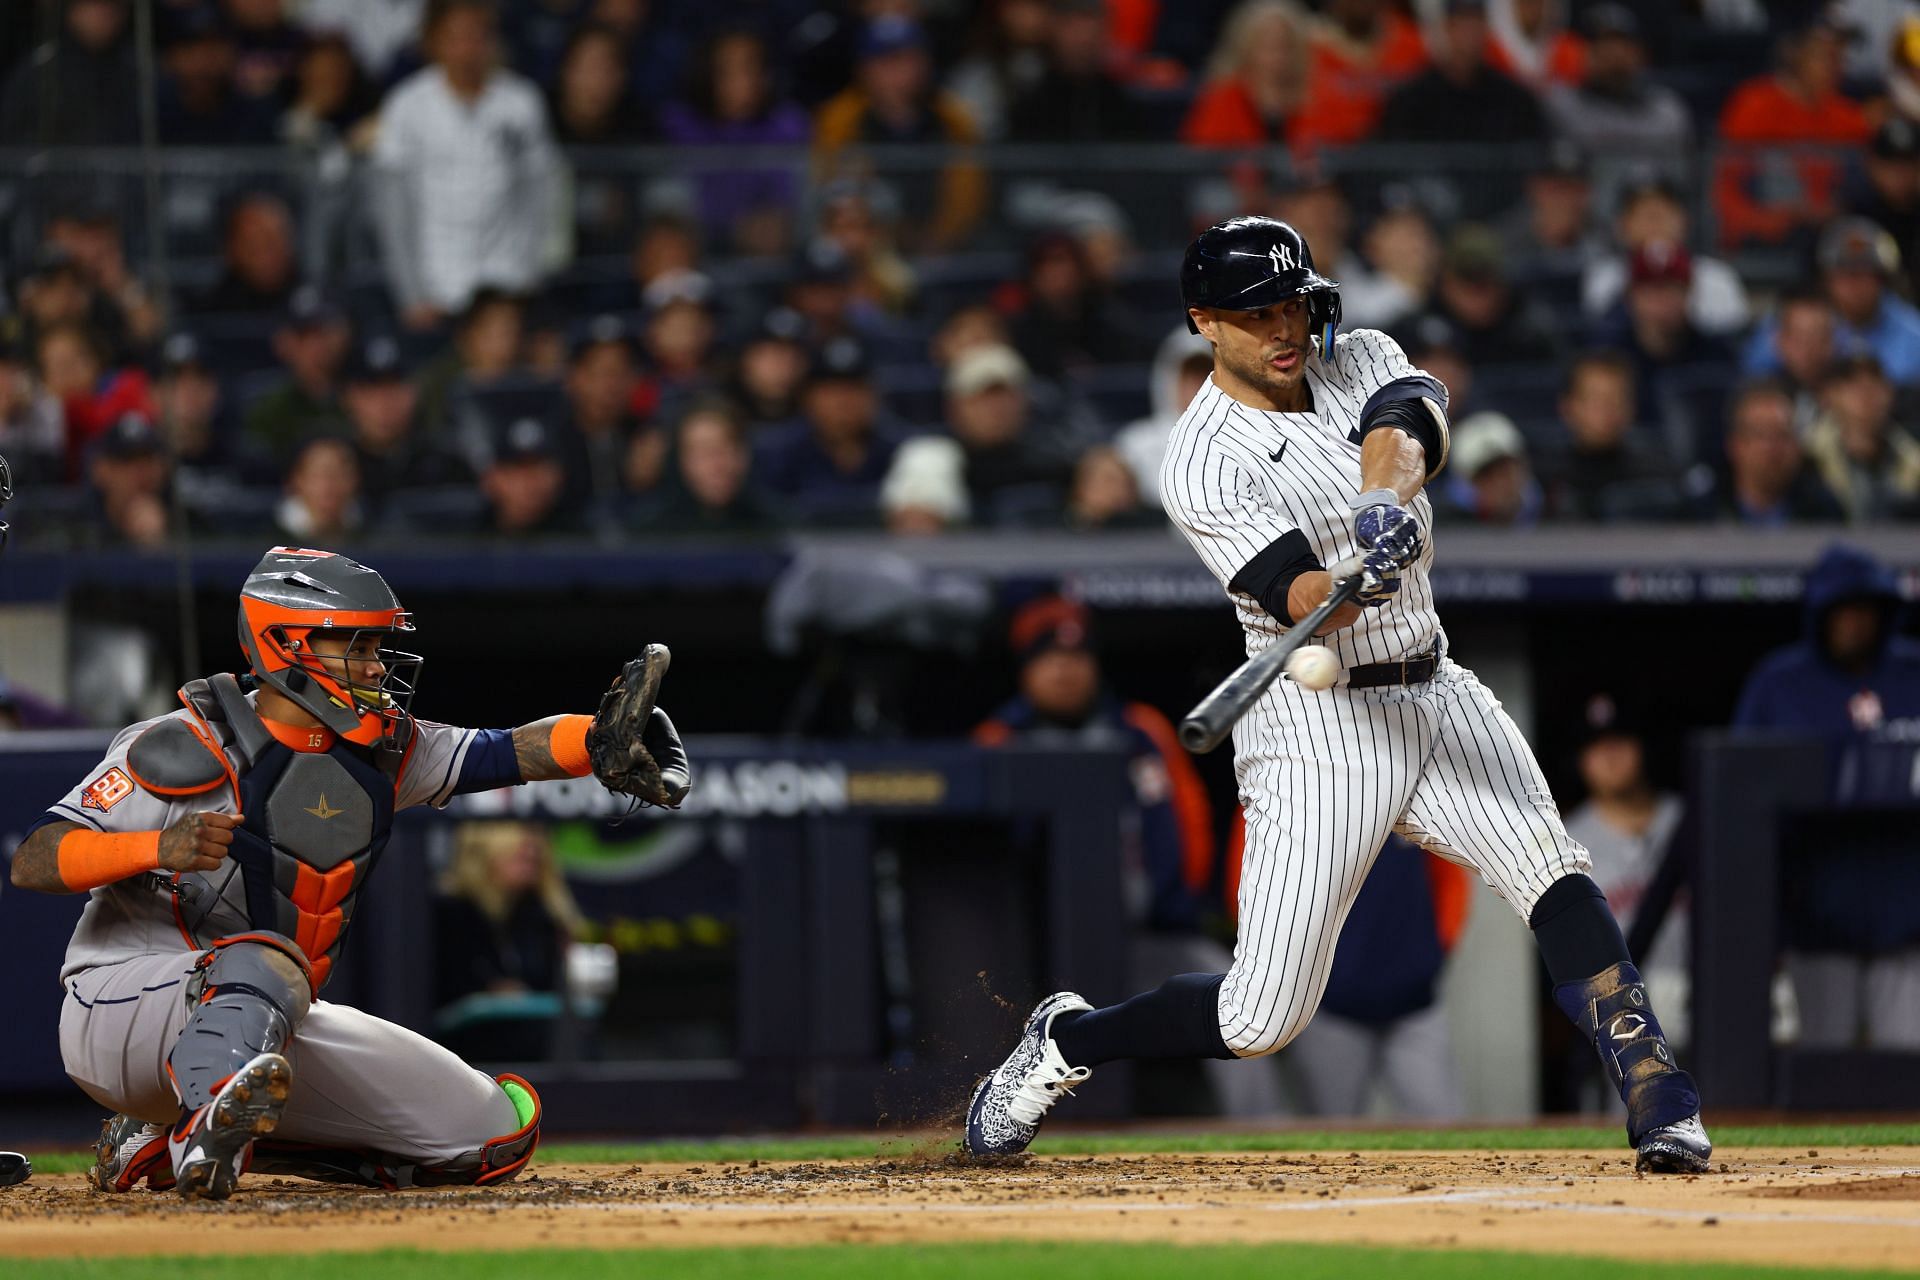 Giancarlo Stanton right field: Will Giancarlo Stanton play in right field  for the Yankees in 2023?